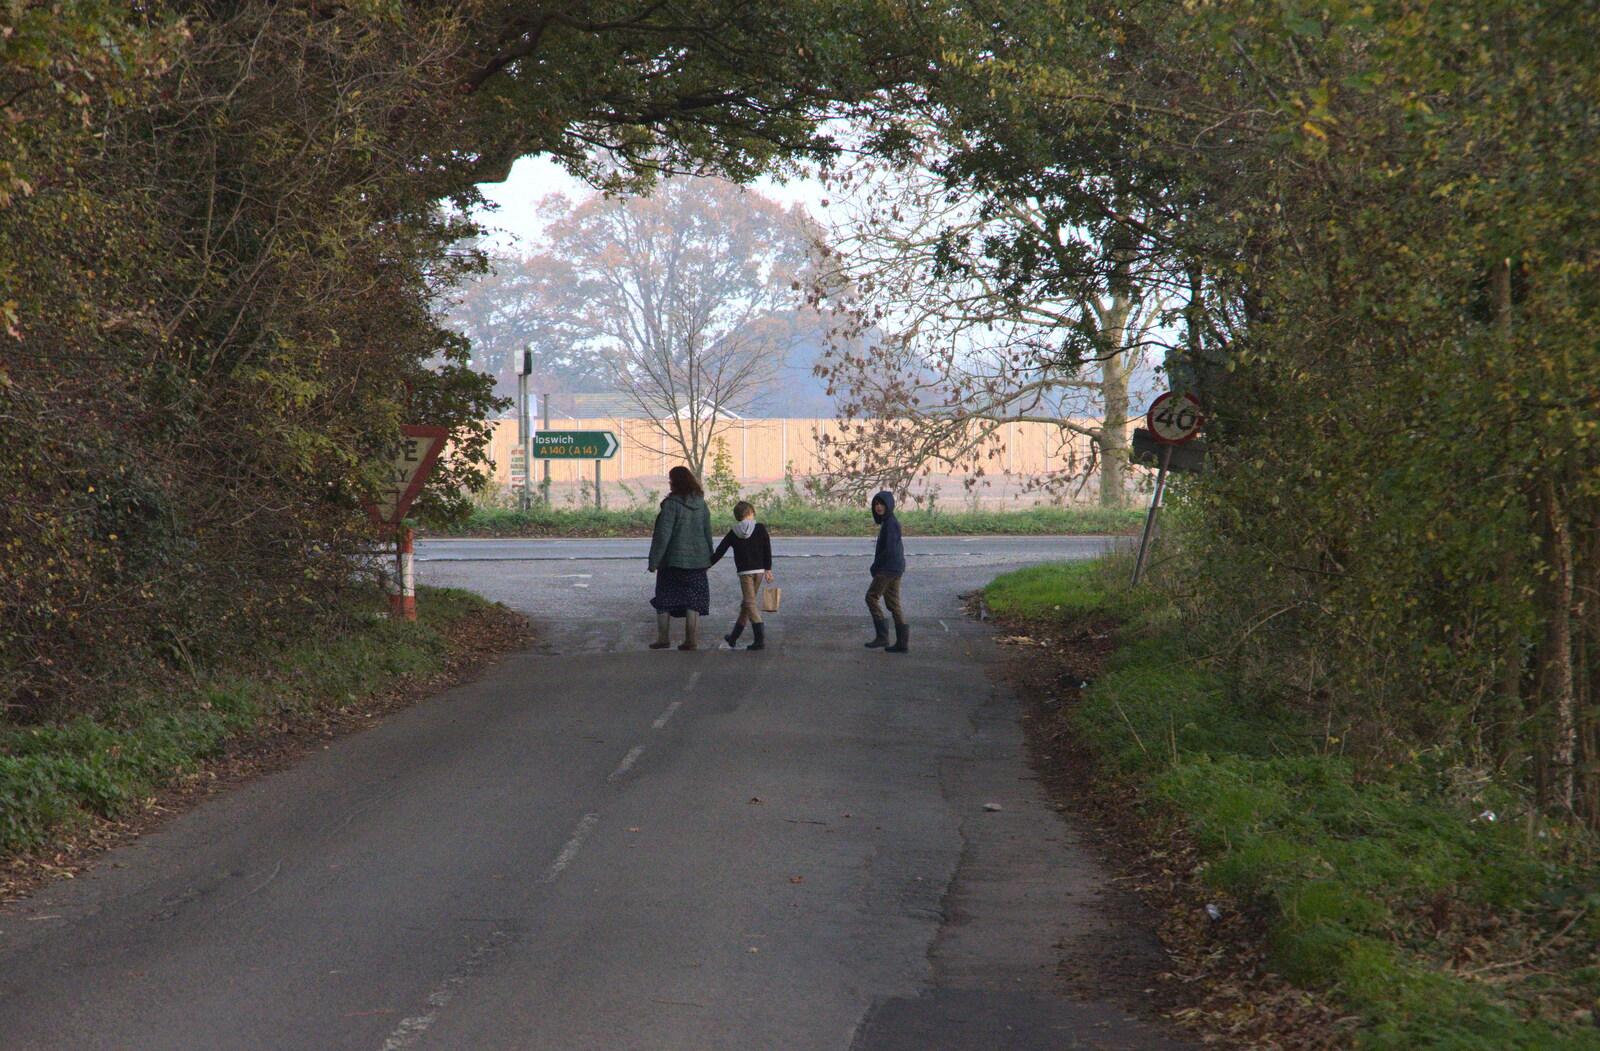 The gang crosses the road from To See the Hairy Pigs, Thrandeston, Suffolk - 7th November 2020